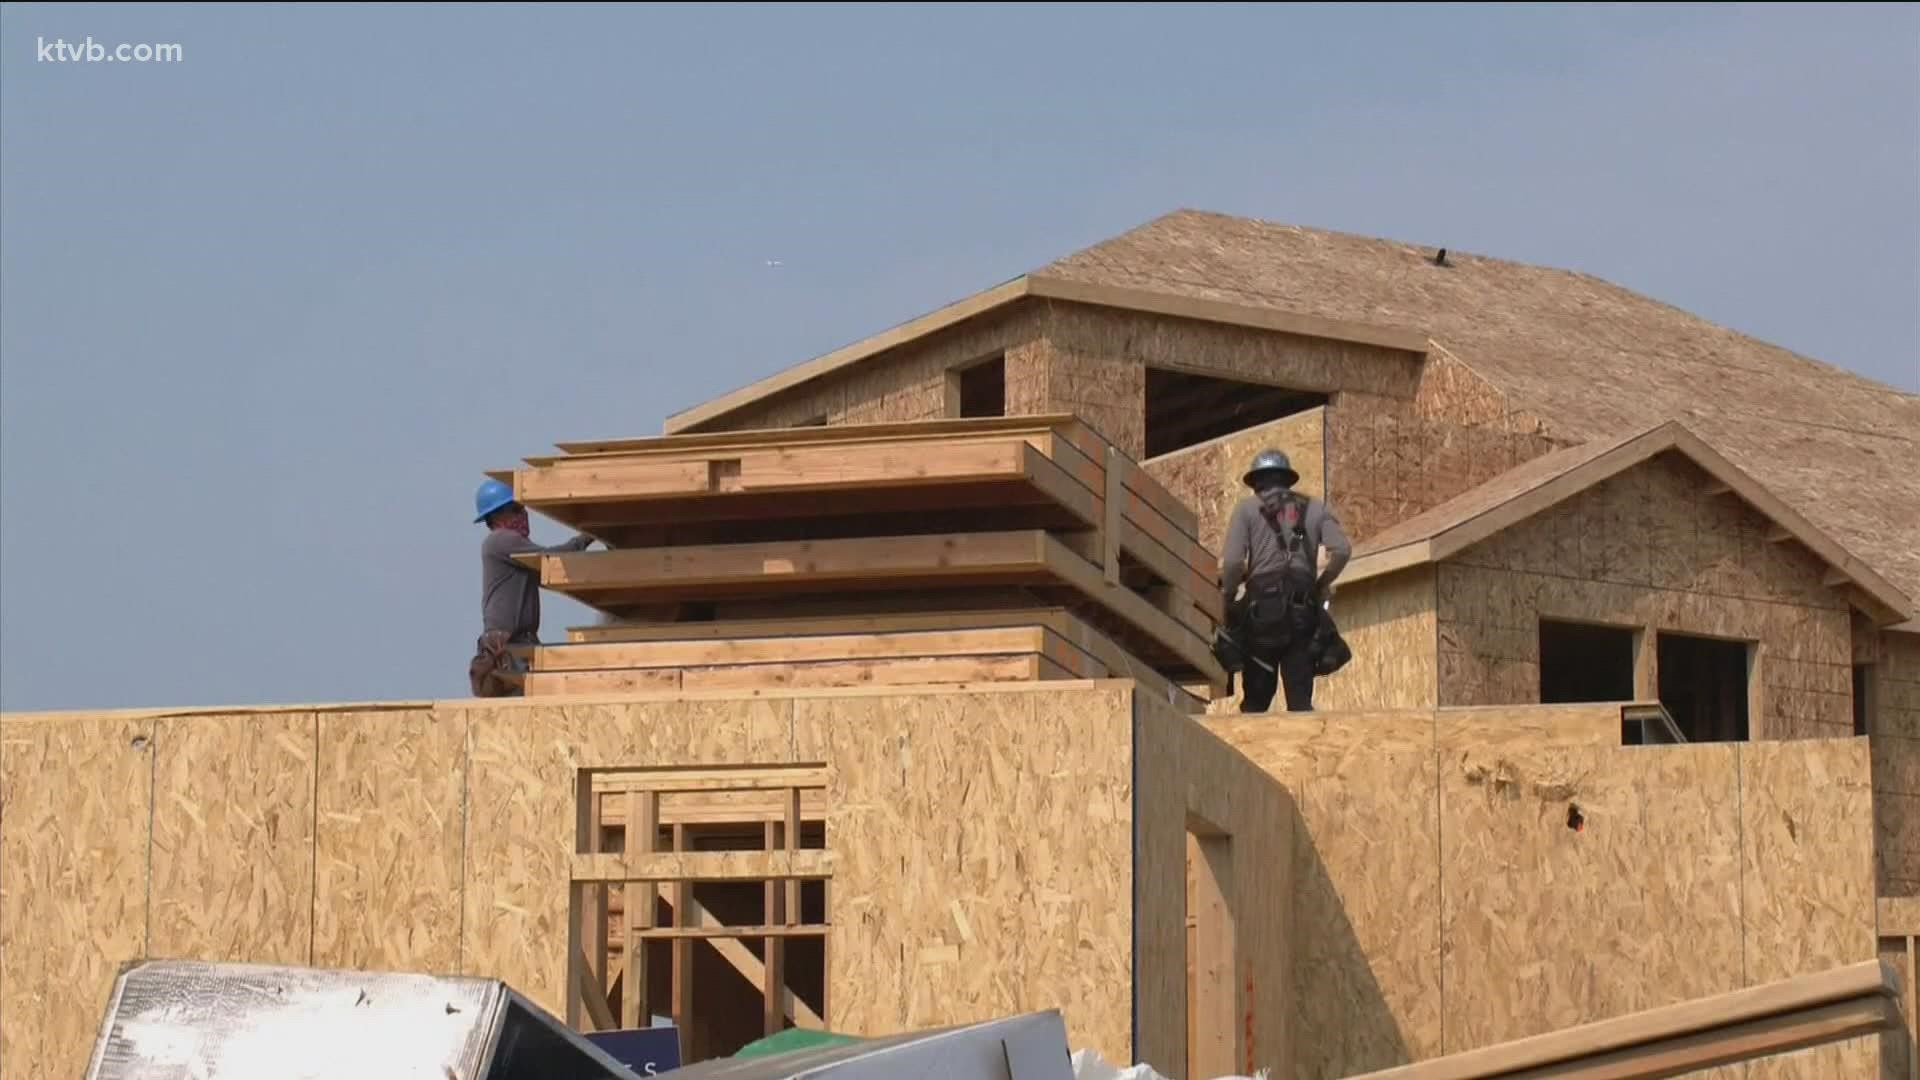 While Idaho's housing market is still one of the hottest in the nation, one buyer manager believes houses can no longer be overpriced like they used to be.